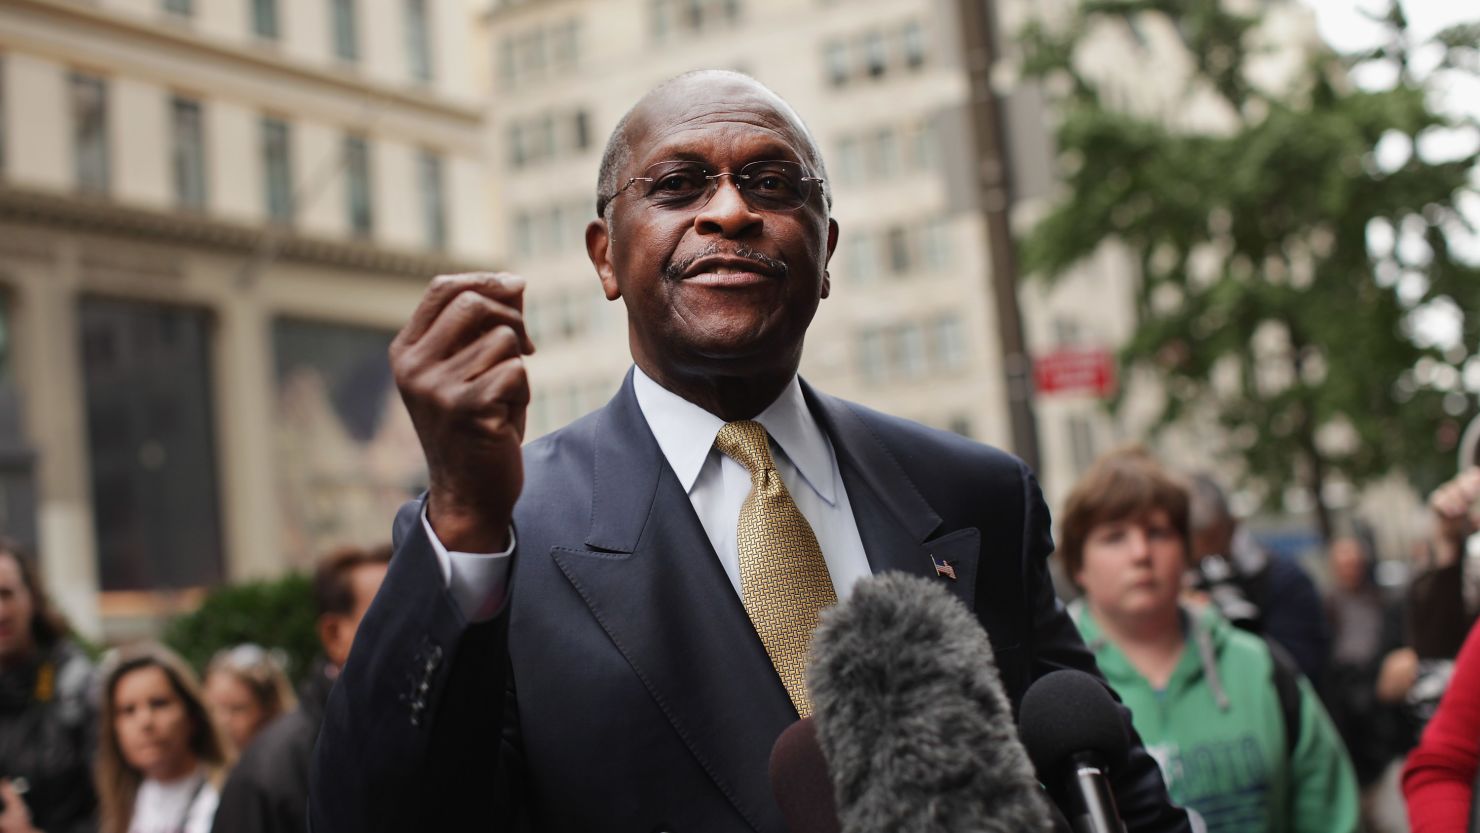 The more inflammatory Herman Cain's statements are,  the more his numbers climb, LZ Granderson says.